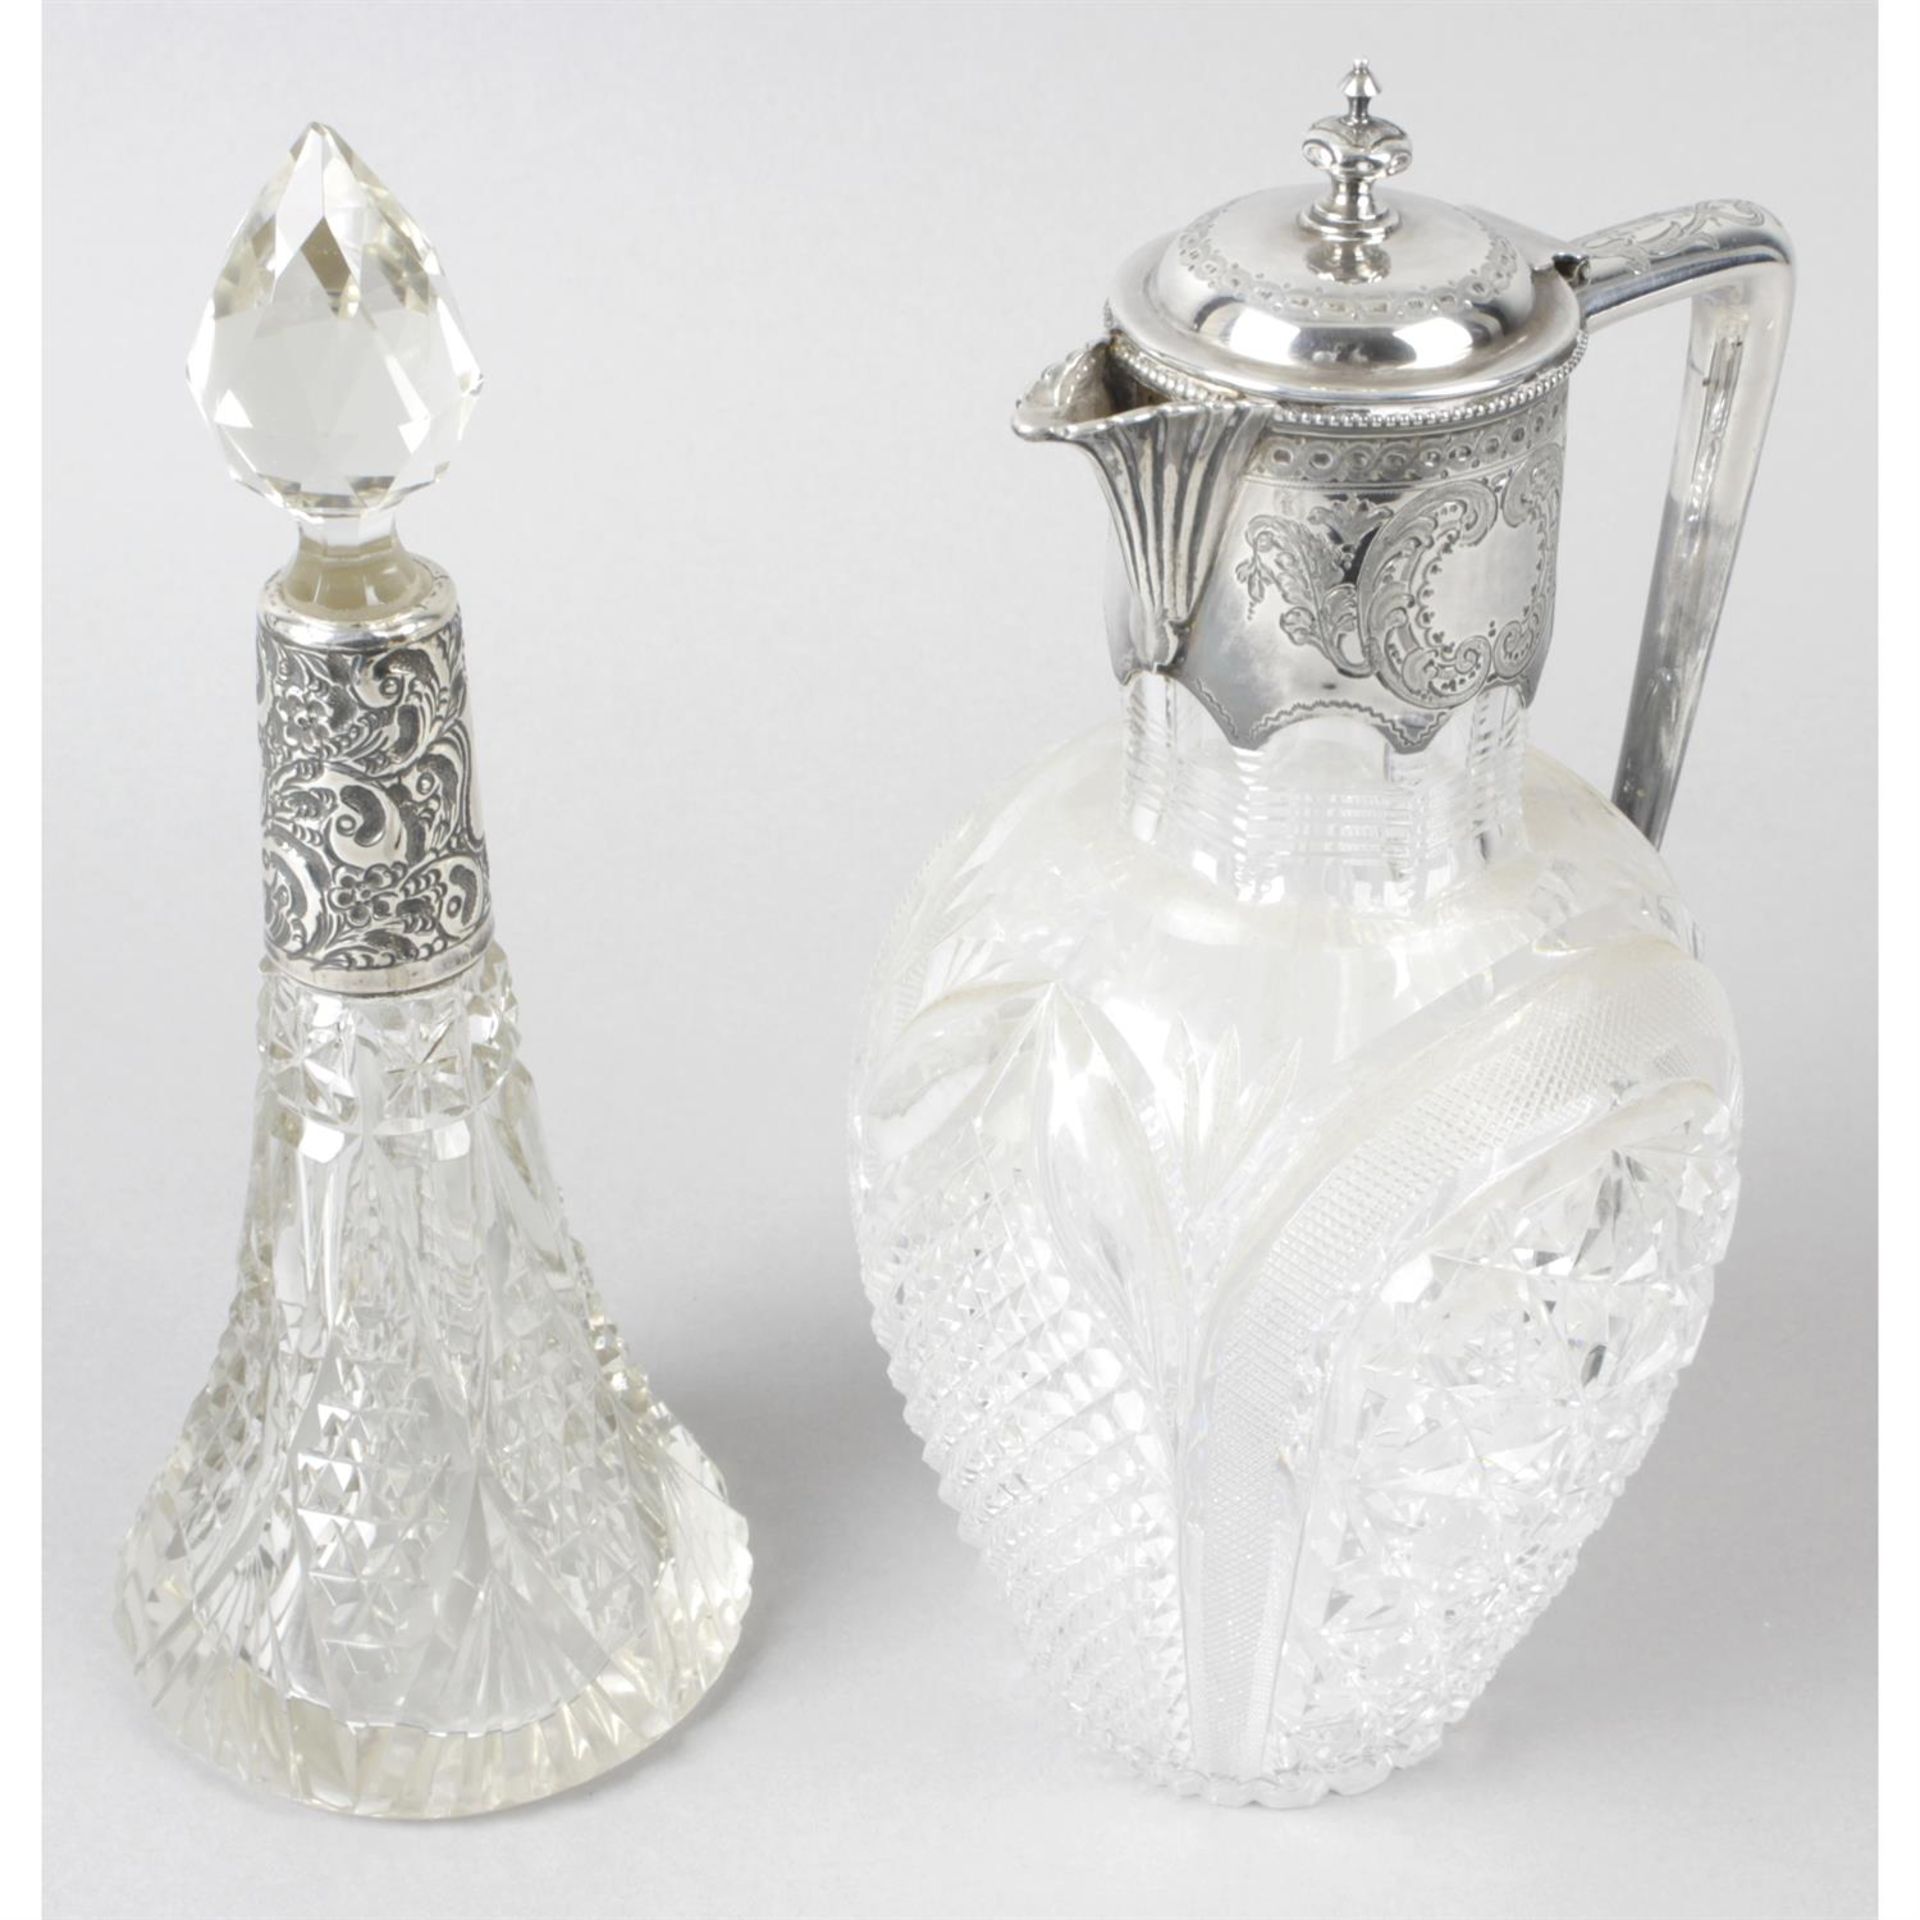 A late Victorian silver mounted glass claret jug, together with a small silver mounted glass